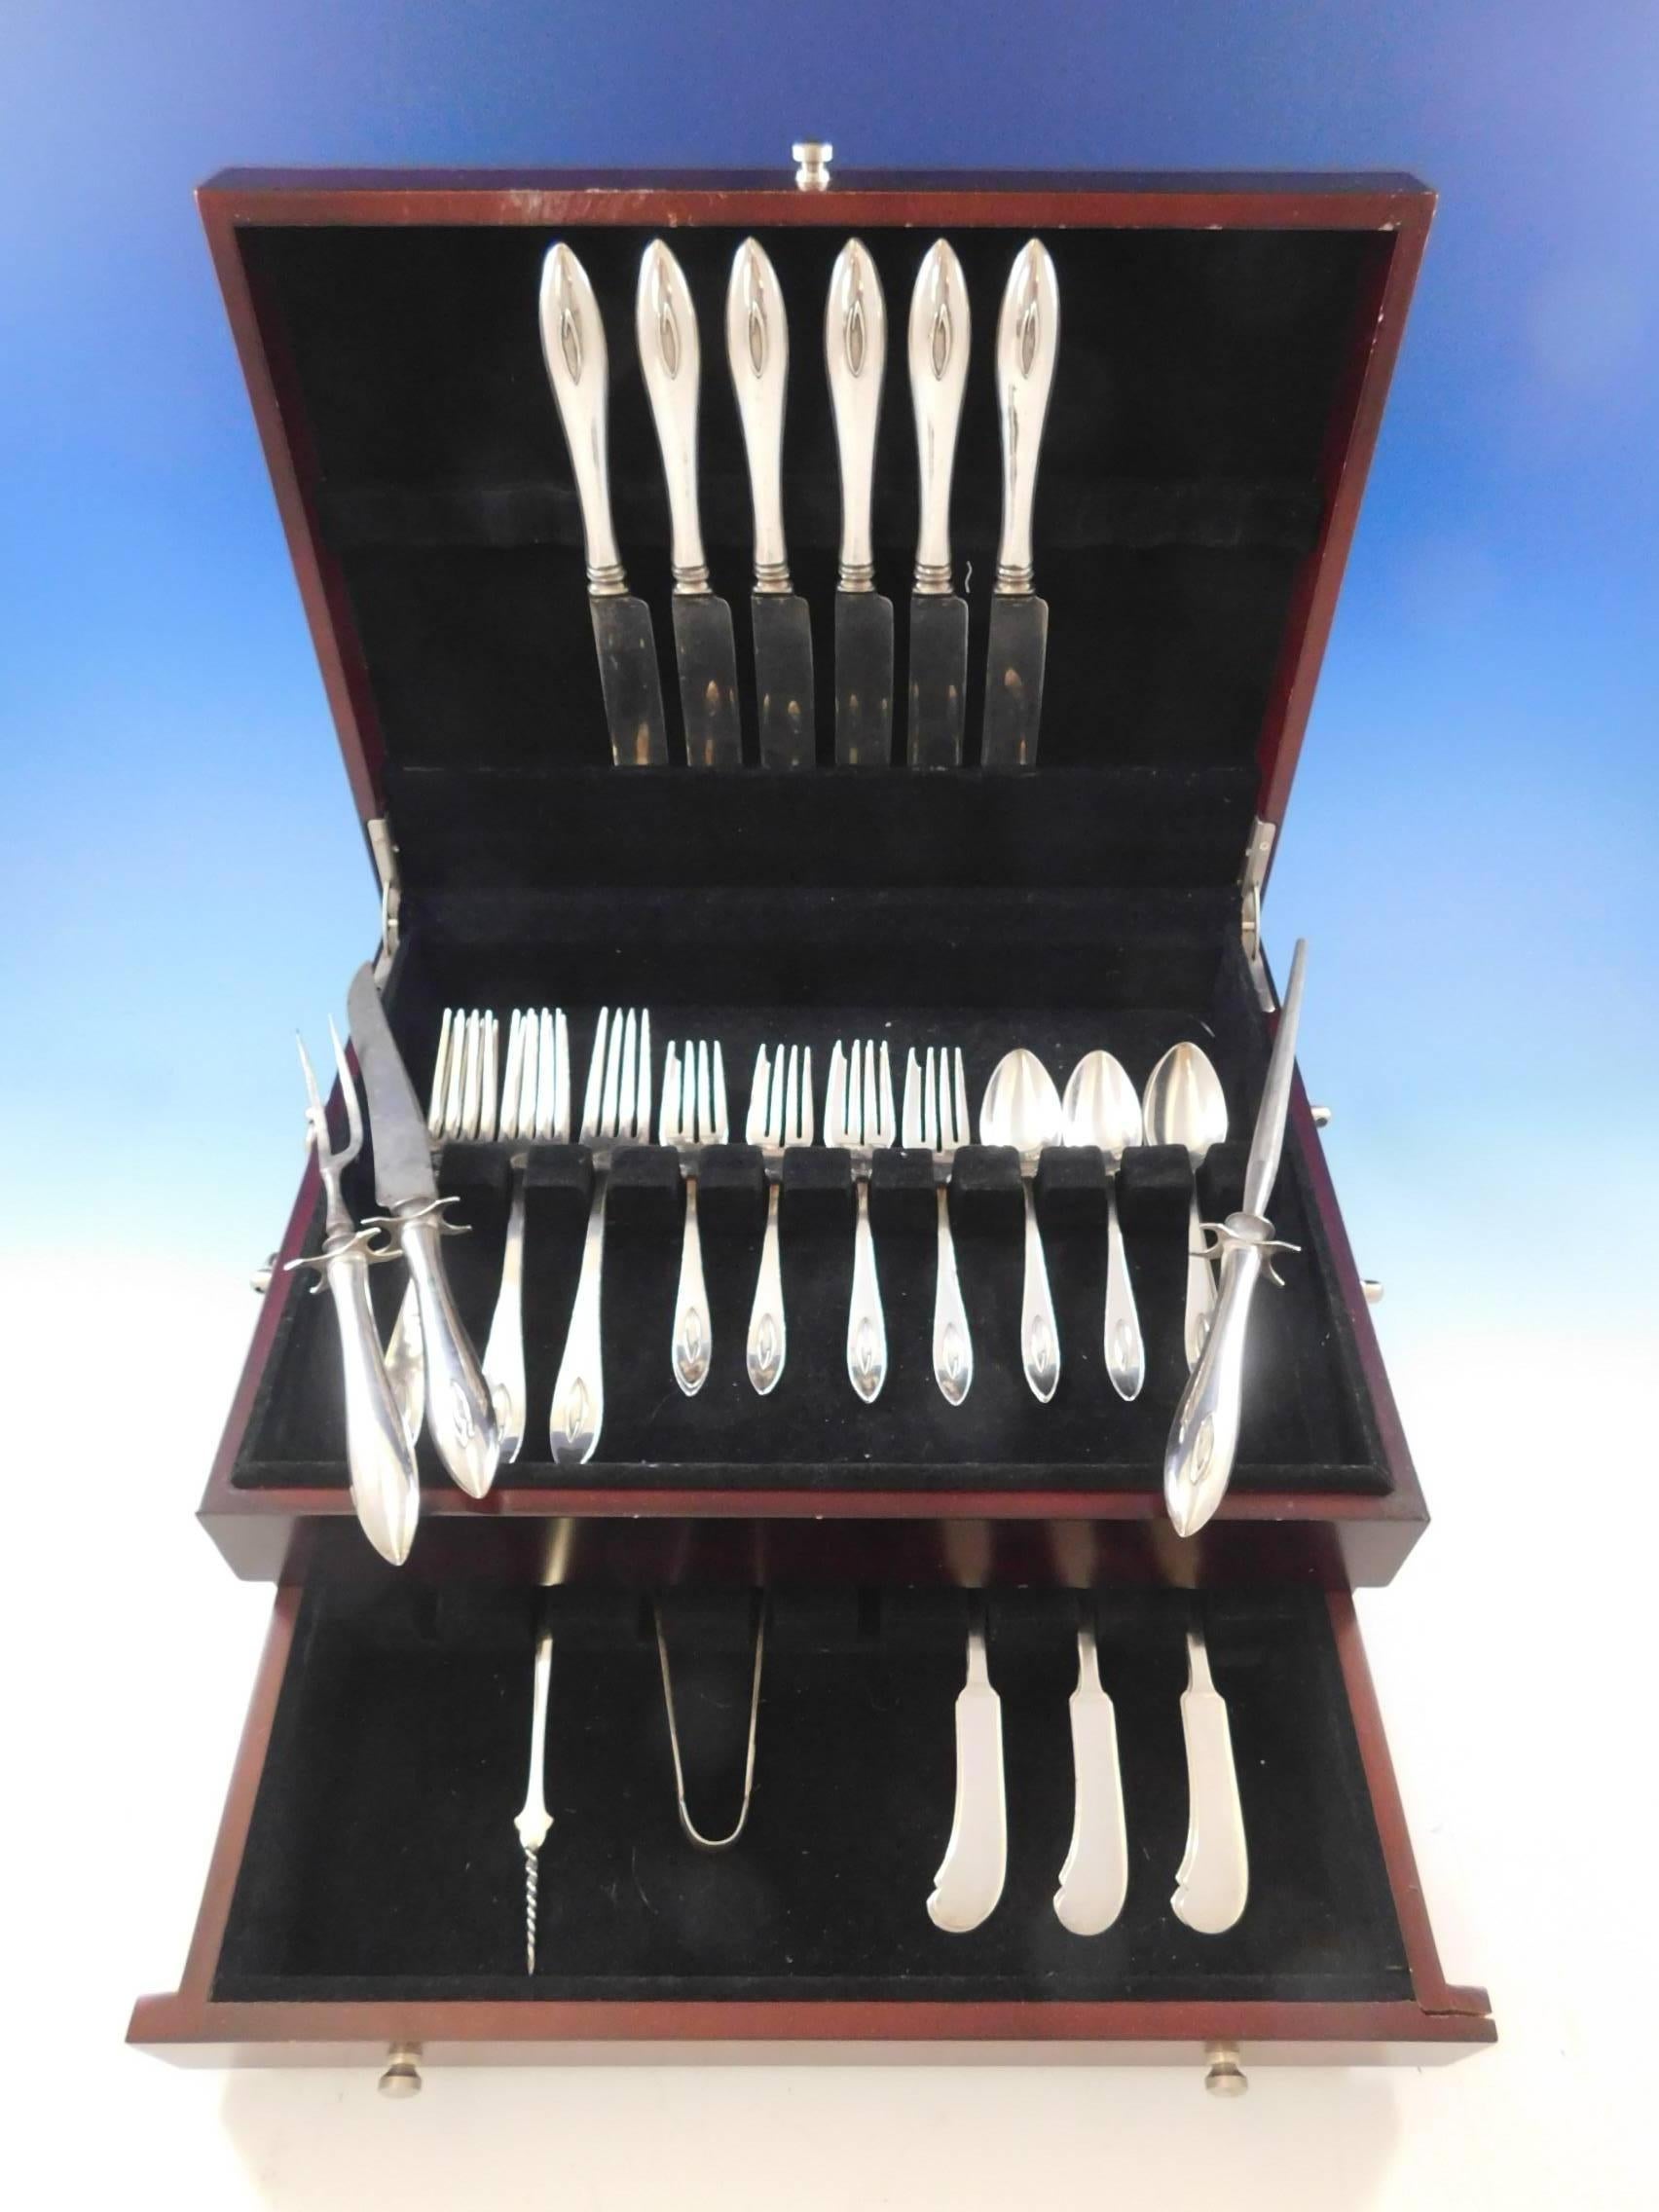 Arts & Crafts Buckingham Narrow, sterling silver dinner size flatware set, 35 pieces. This pattern is by Shreve & Co. of San Francisco, circa 1915. This set includes: 

Six dinner size knives, 9 3/4